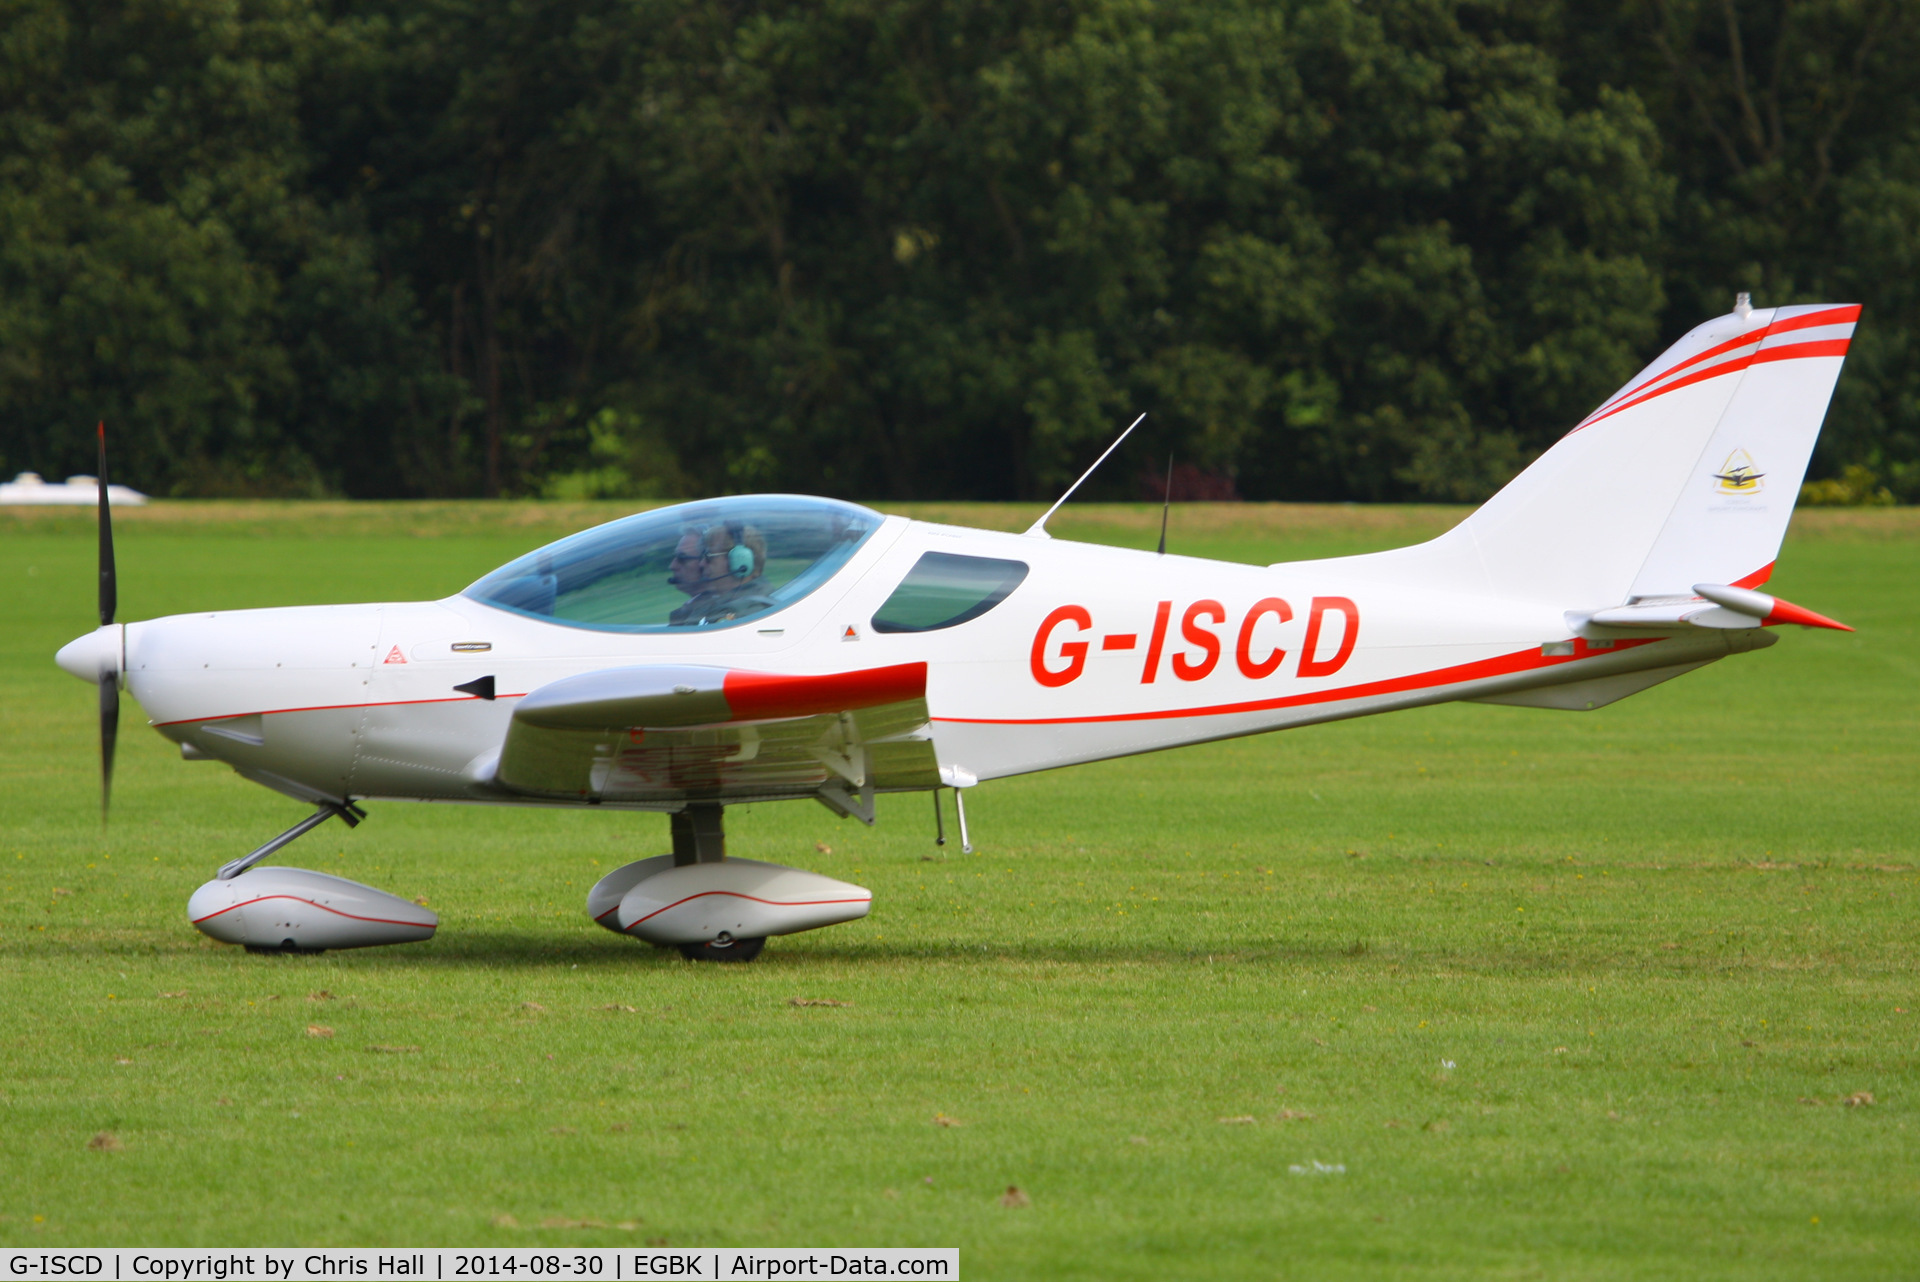 G-ISCD, 2010 CZAW SportCruiser C/N 10SC297, at the LAA Rally 2014, Sywell